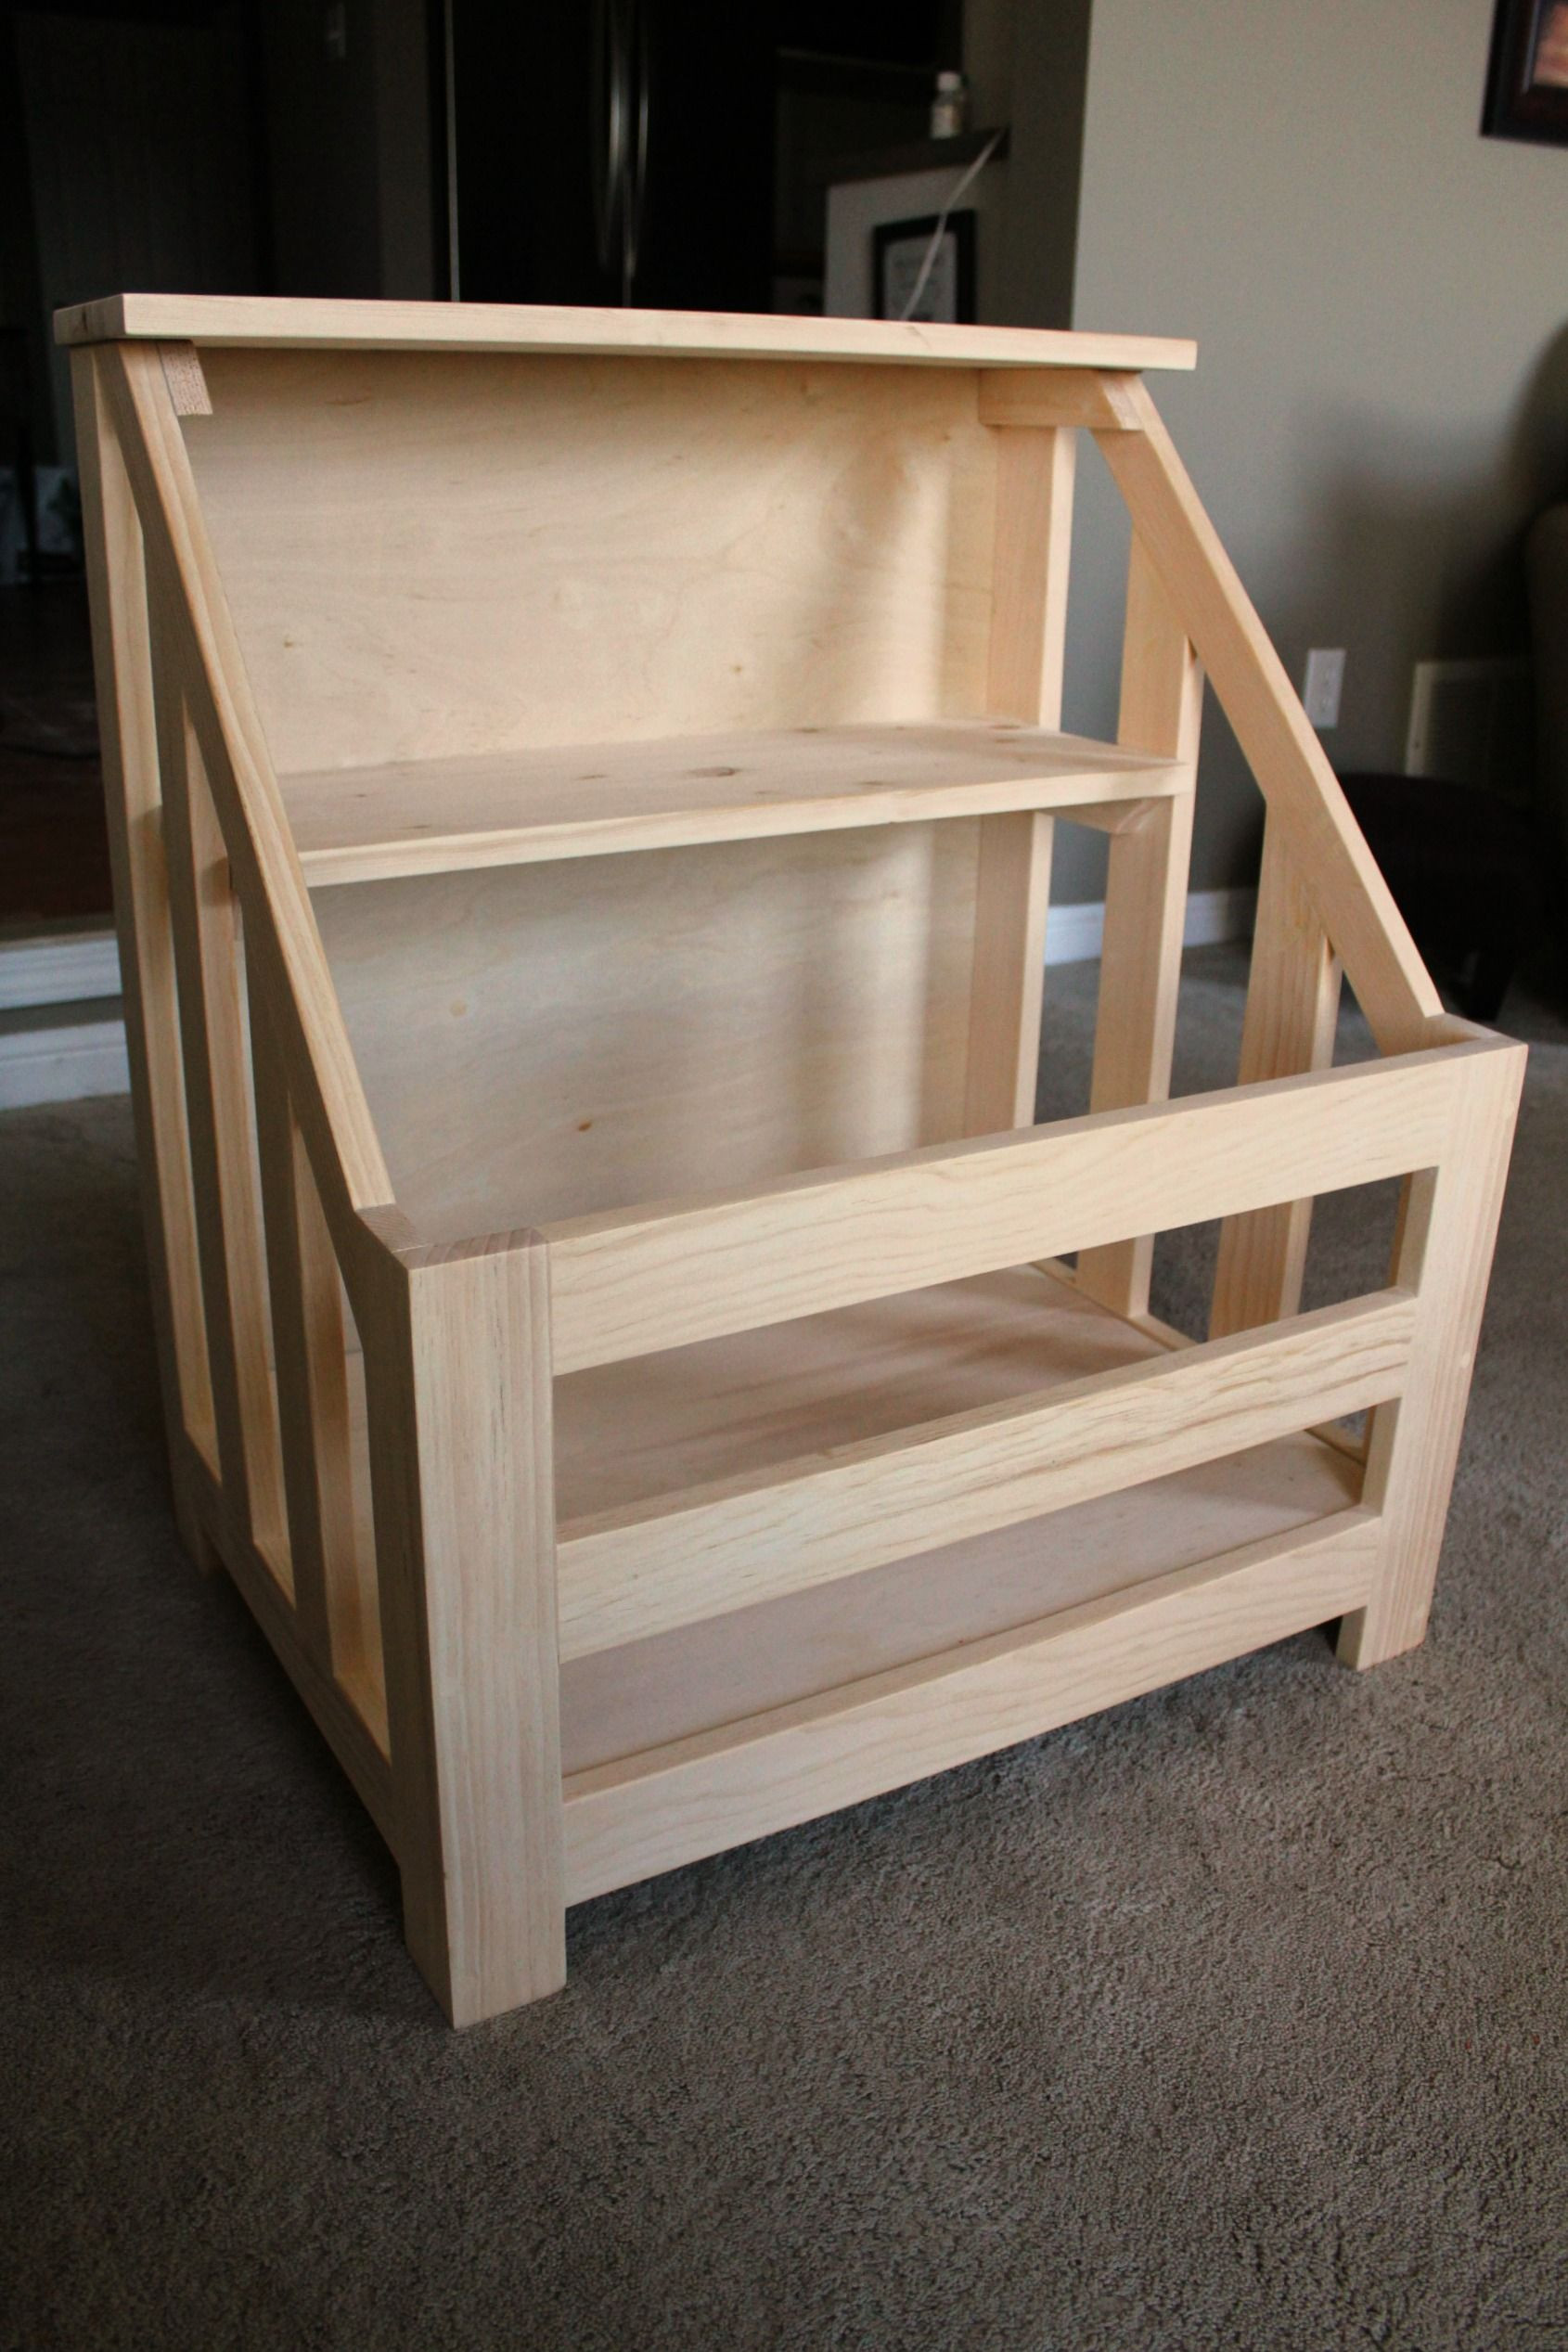 DIY Wooden Box With Hinged Lid
 DIY toy box bookshelf I plan to recreate this using